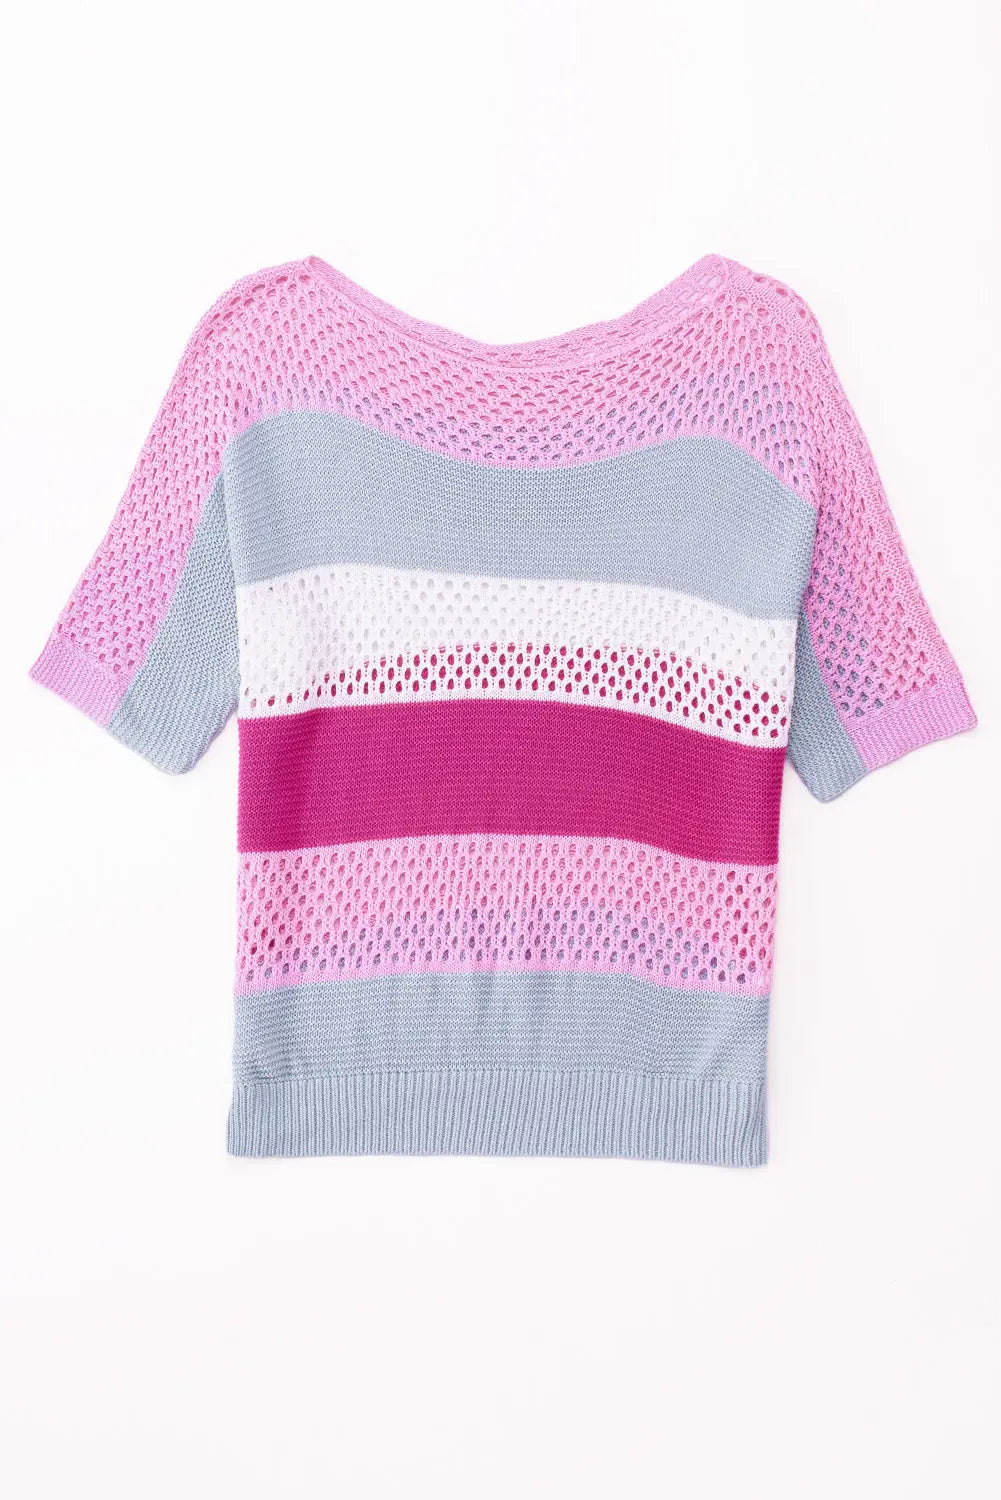 Sky blue knitted eyelet colorblock striped half sleeves top - t-shirts